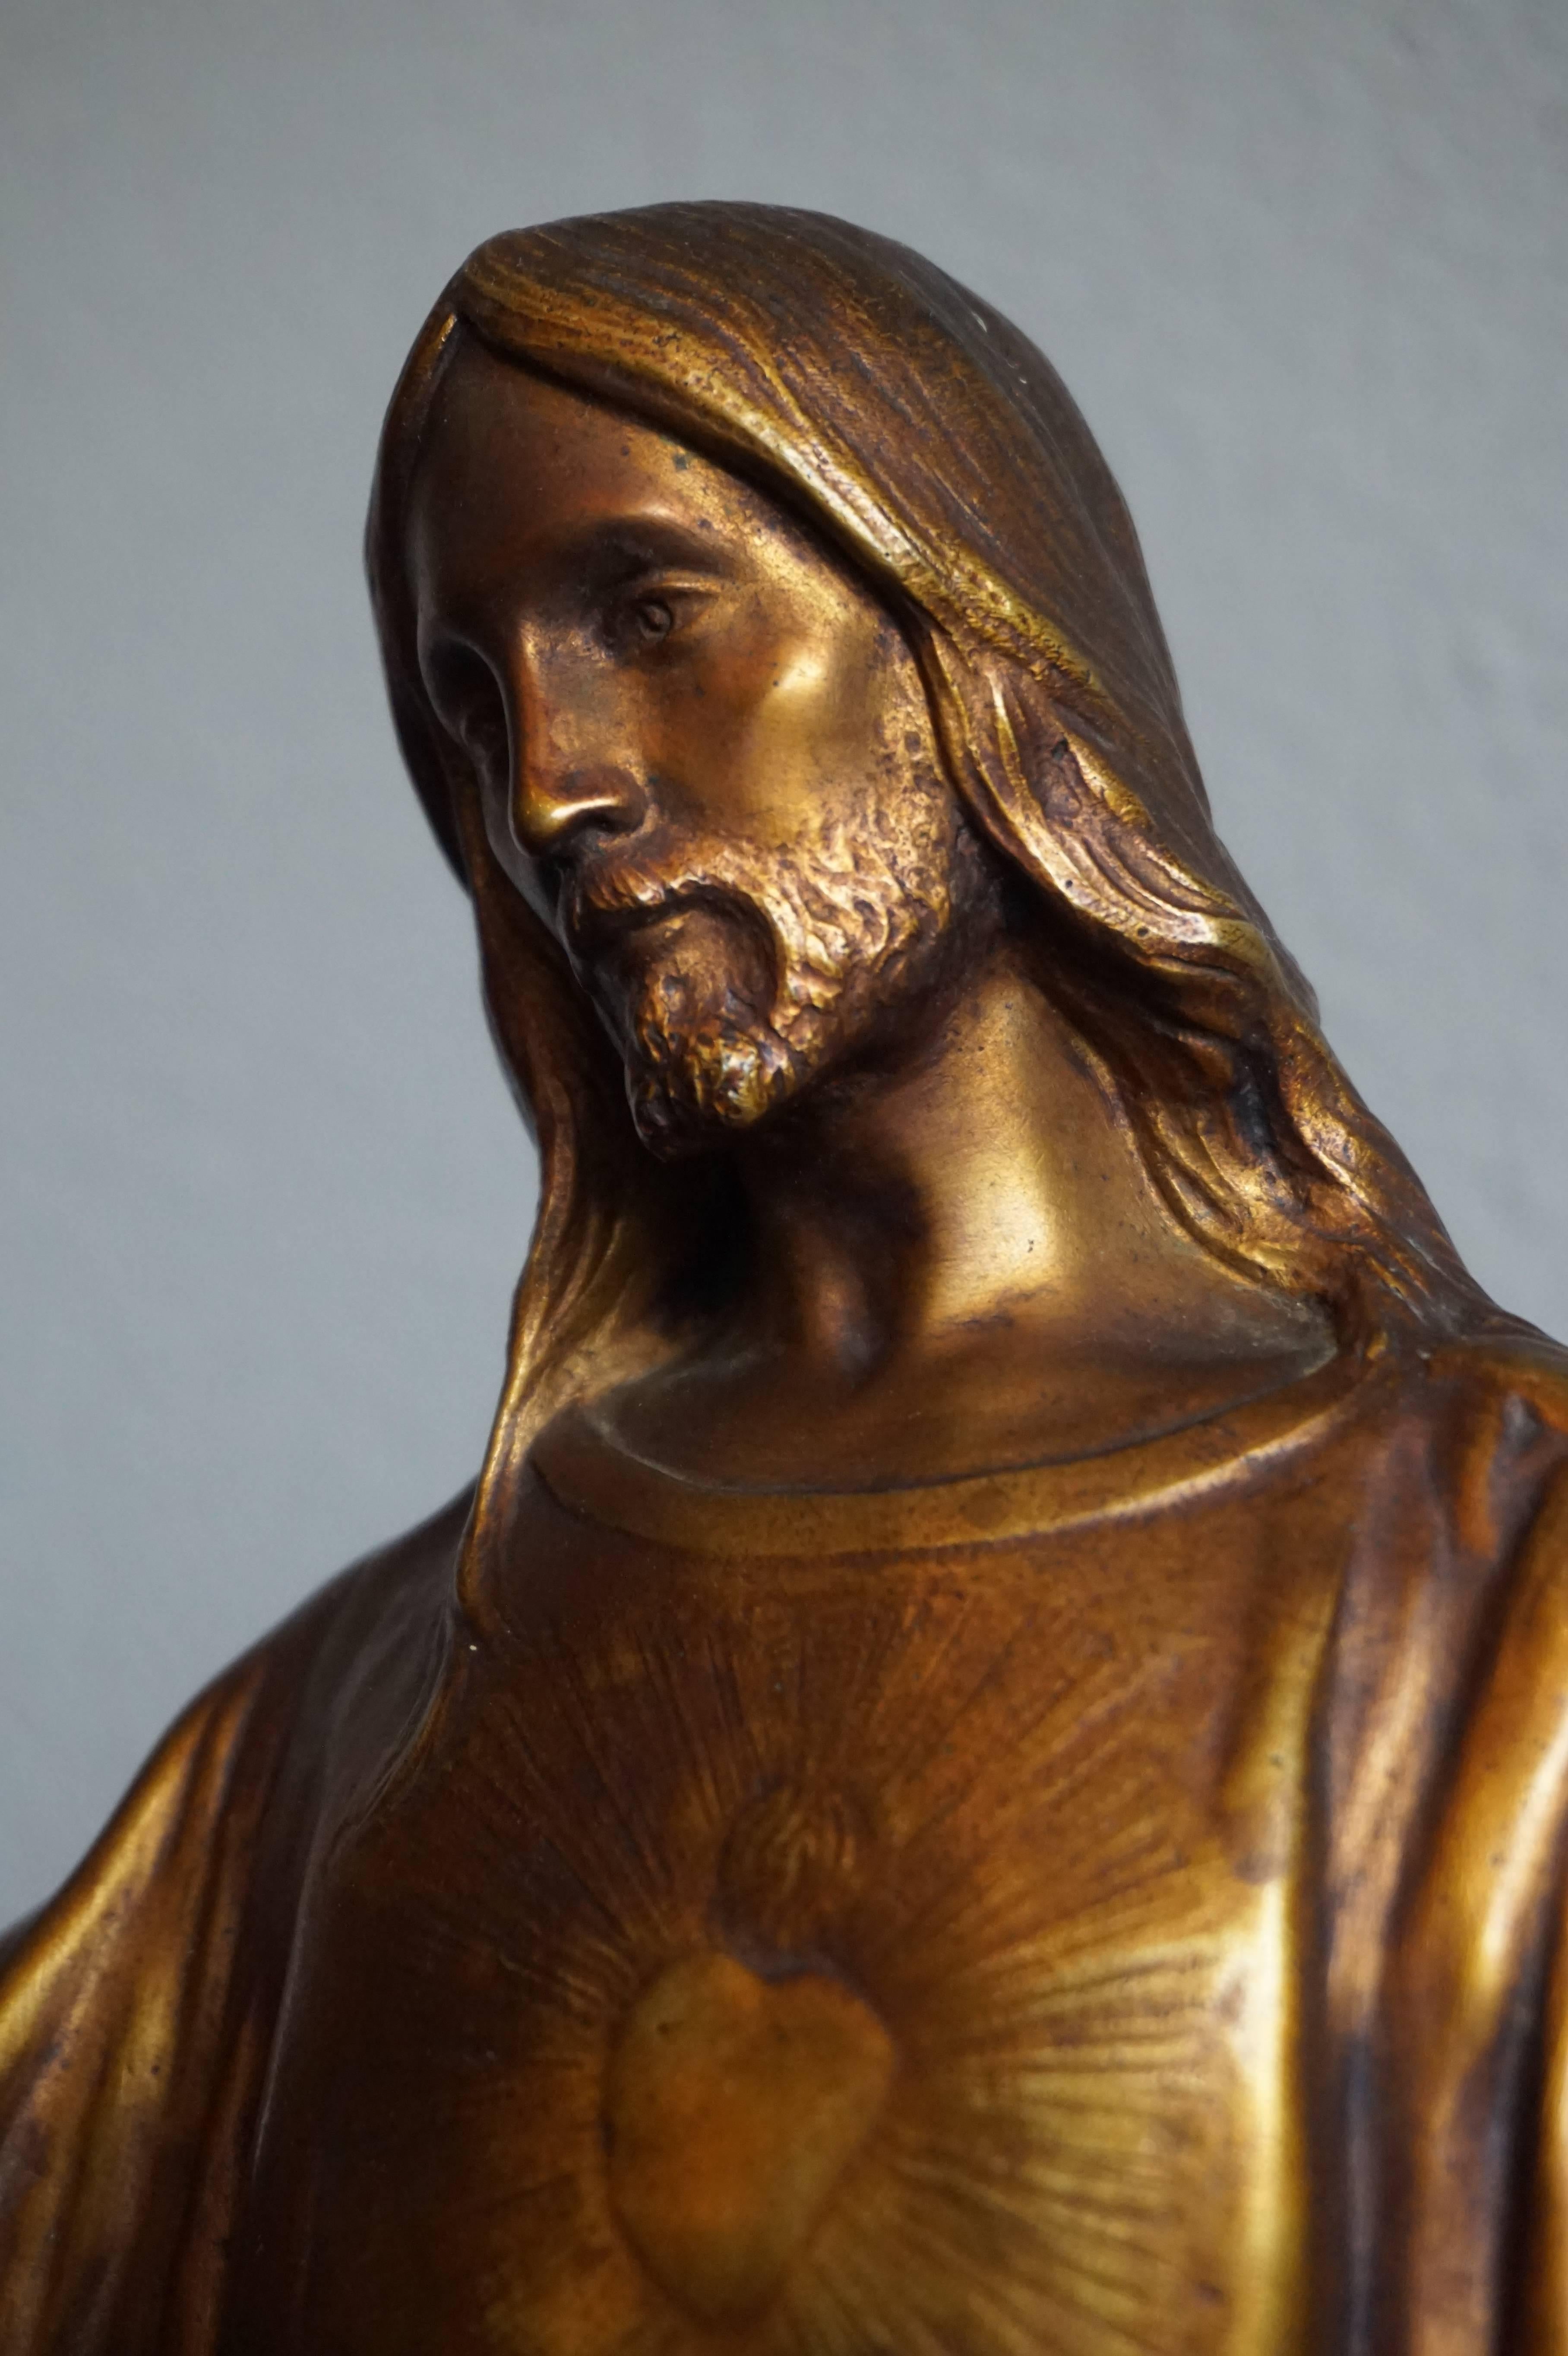 Stunning and large work of religious art.

The fine details and the perfectly natural poisture of this amazing Christ sculpture reveal the work of a master sculptor. This bronze 'statuette' of the sacred heart of Jesus is both gilt and patinated and